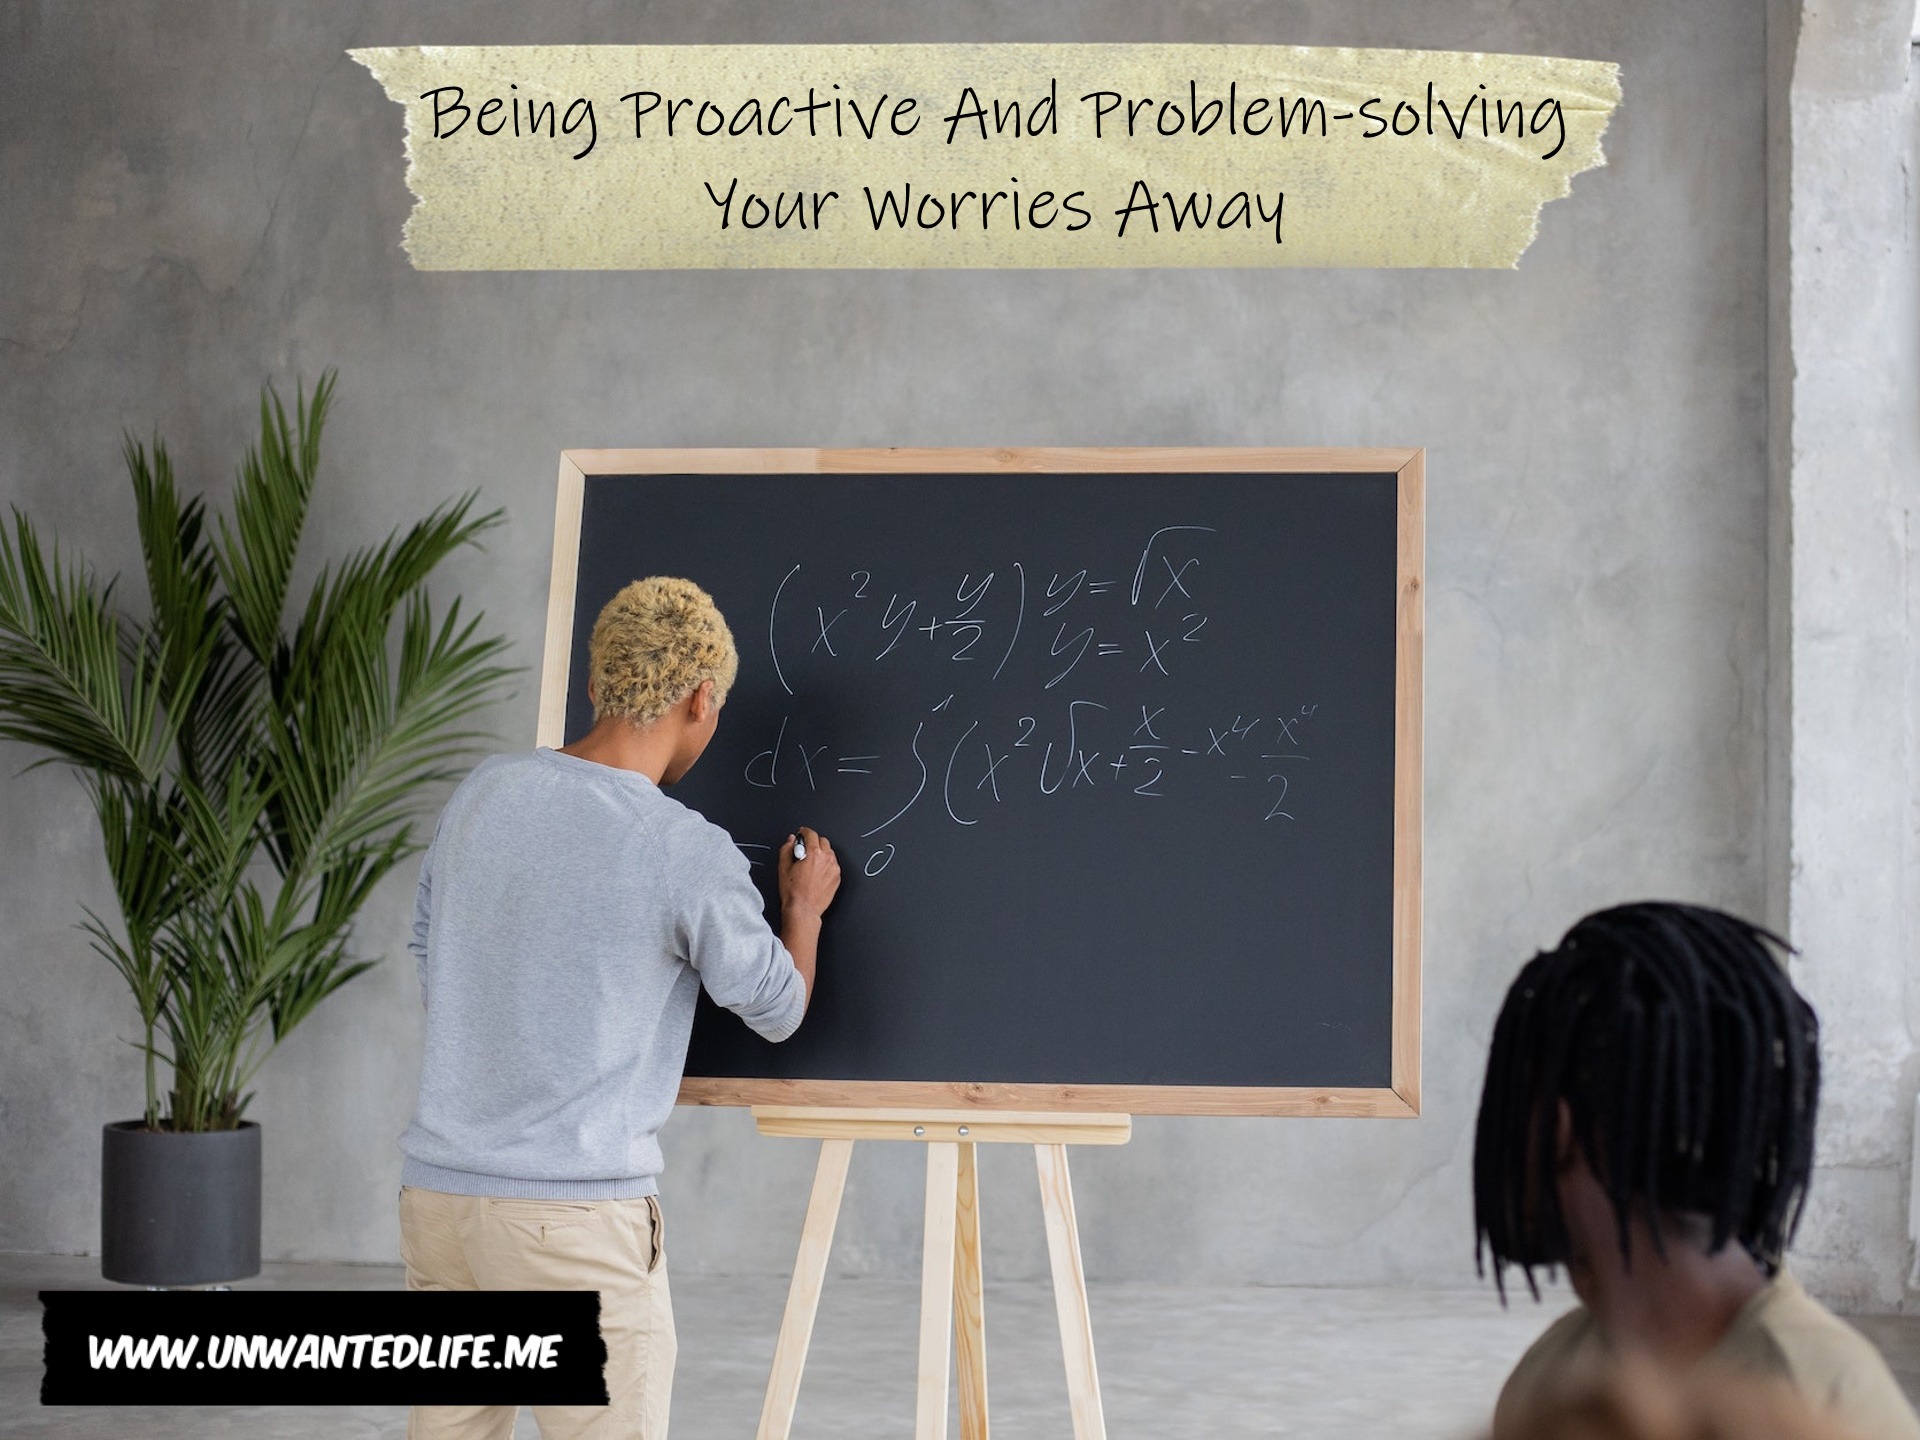 A person of mixed ethnicity writing a formula on a chalkboard to represent the topic of the article - Being Proactive And Problem-solving Your Worries Away